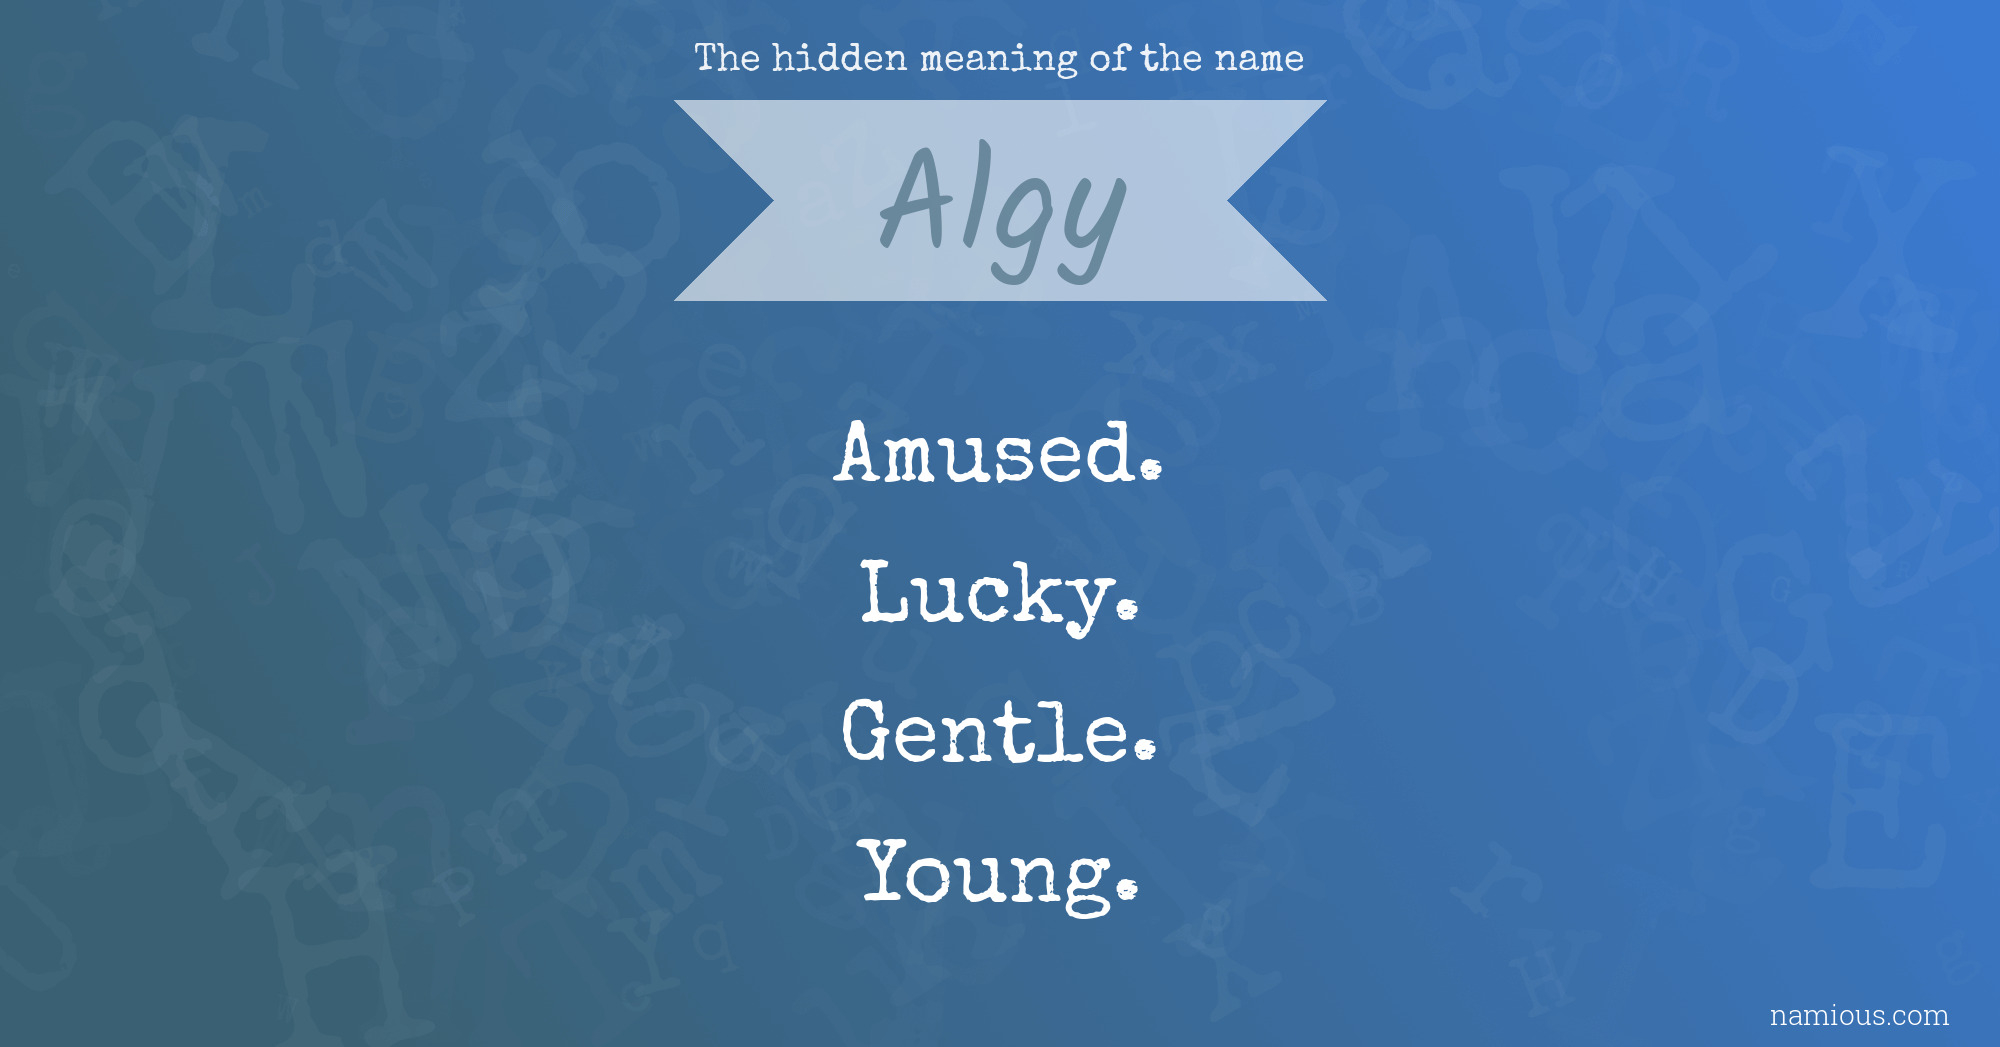 The hidden meaning of the name Algy